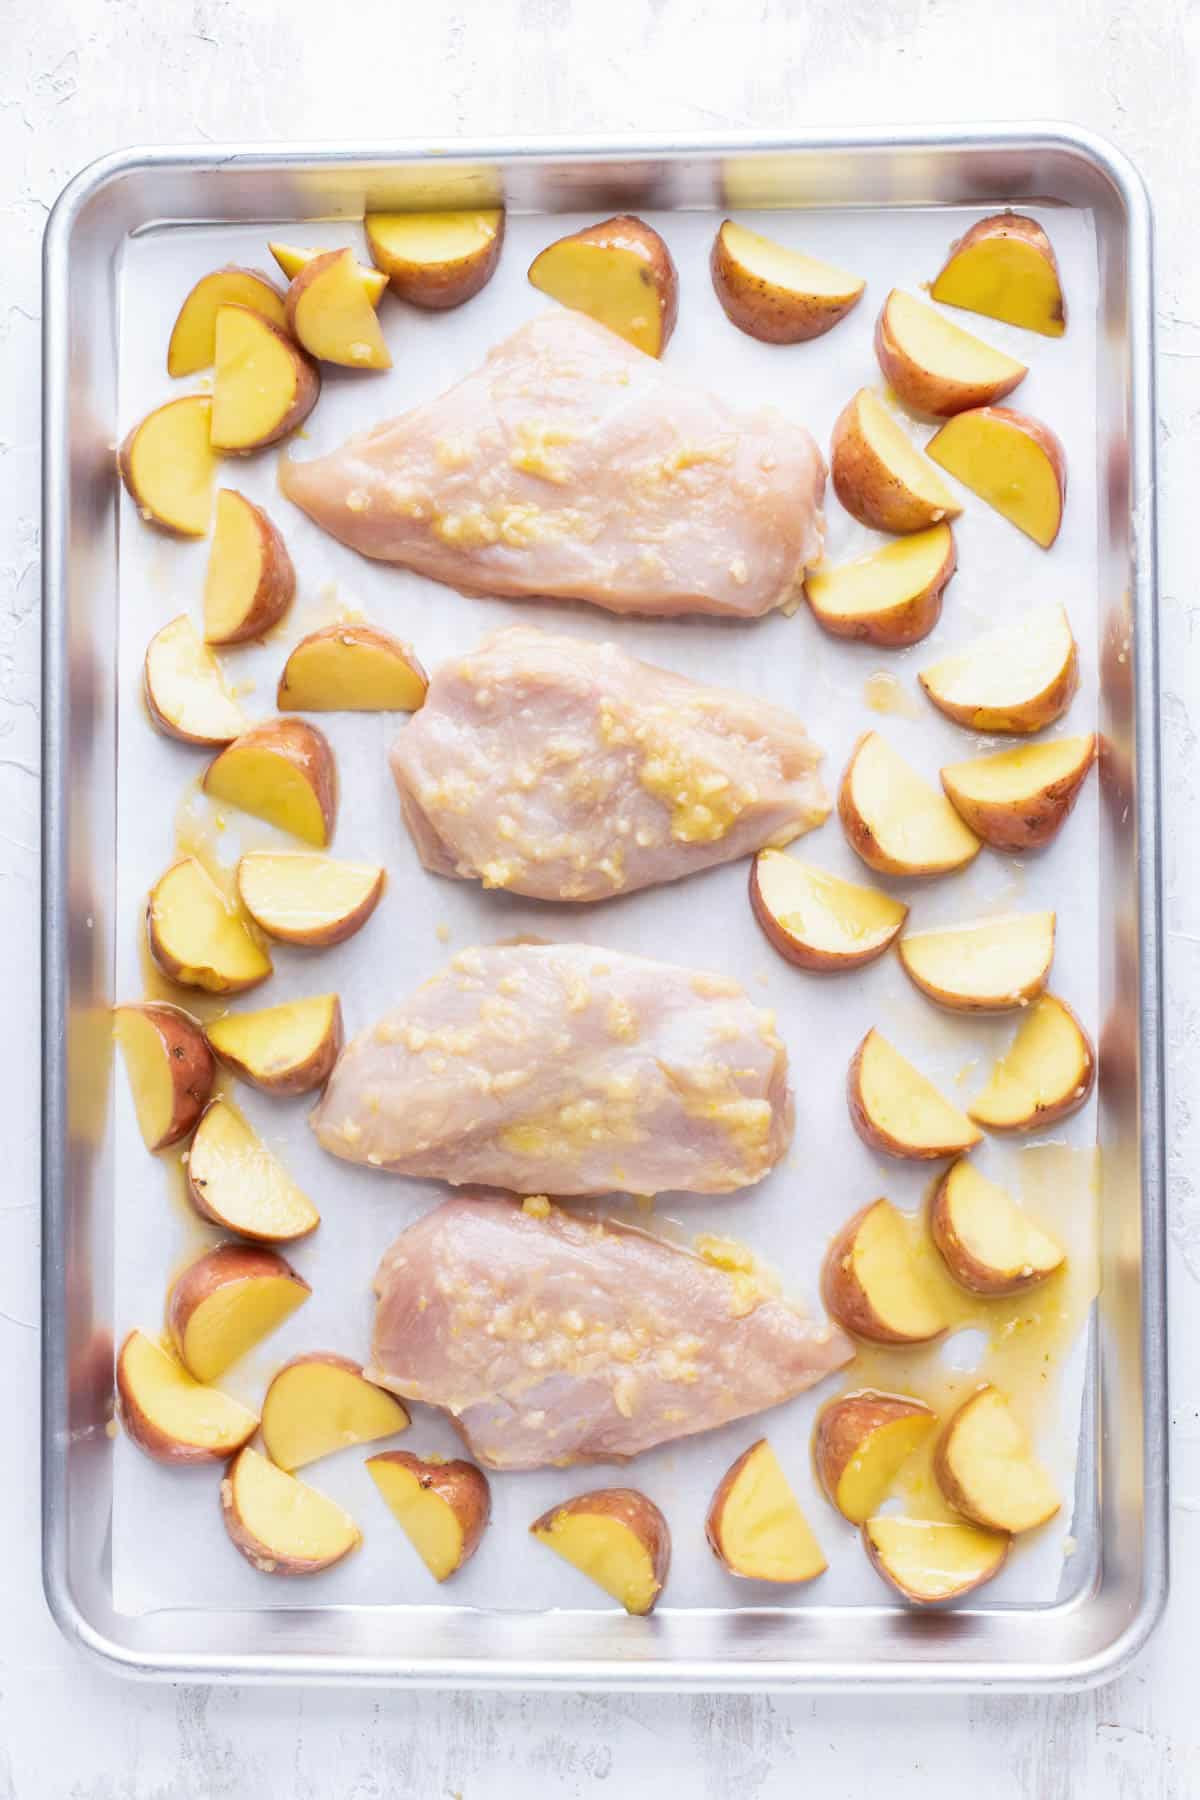 Chicken and potatoes are spread on a baking sheet.